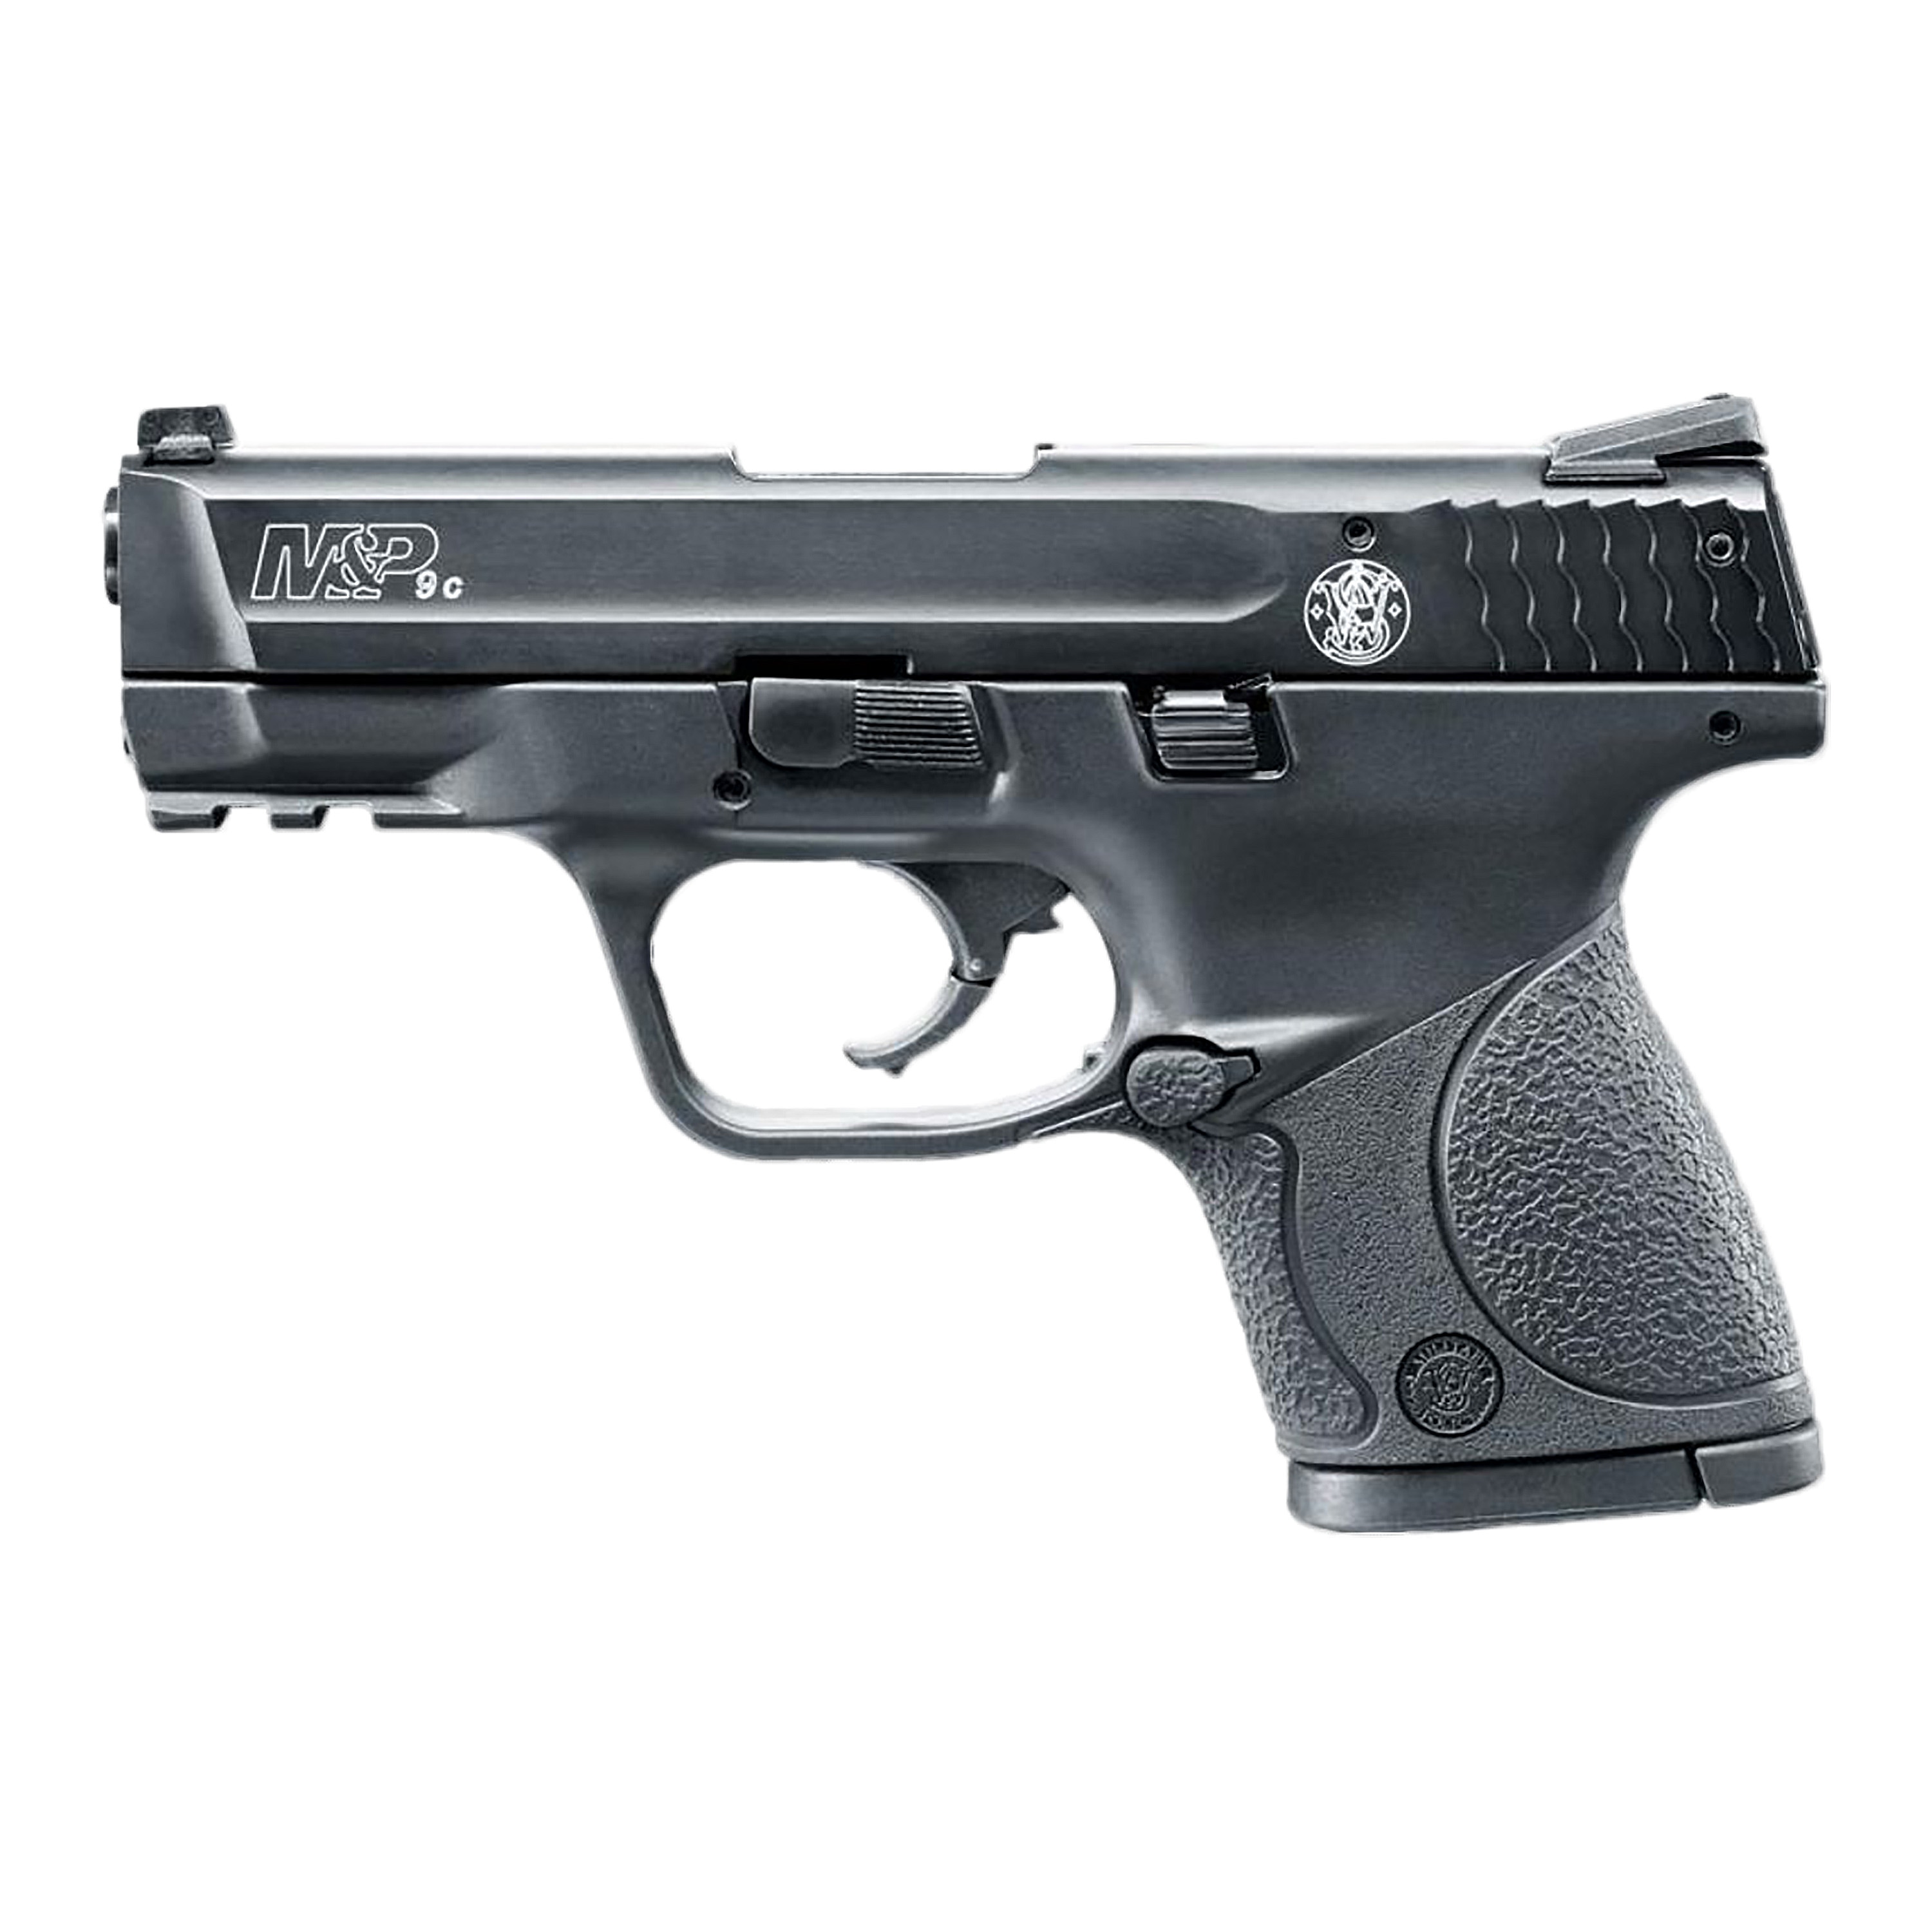 purchase-the-s-w-pistol-m-p-9c-black-by-asmc